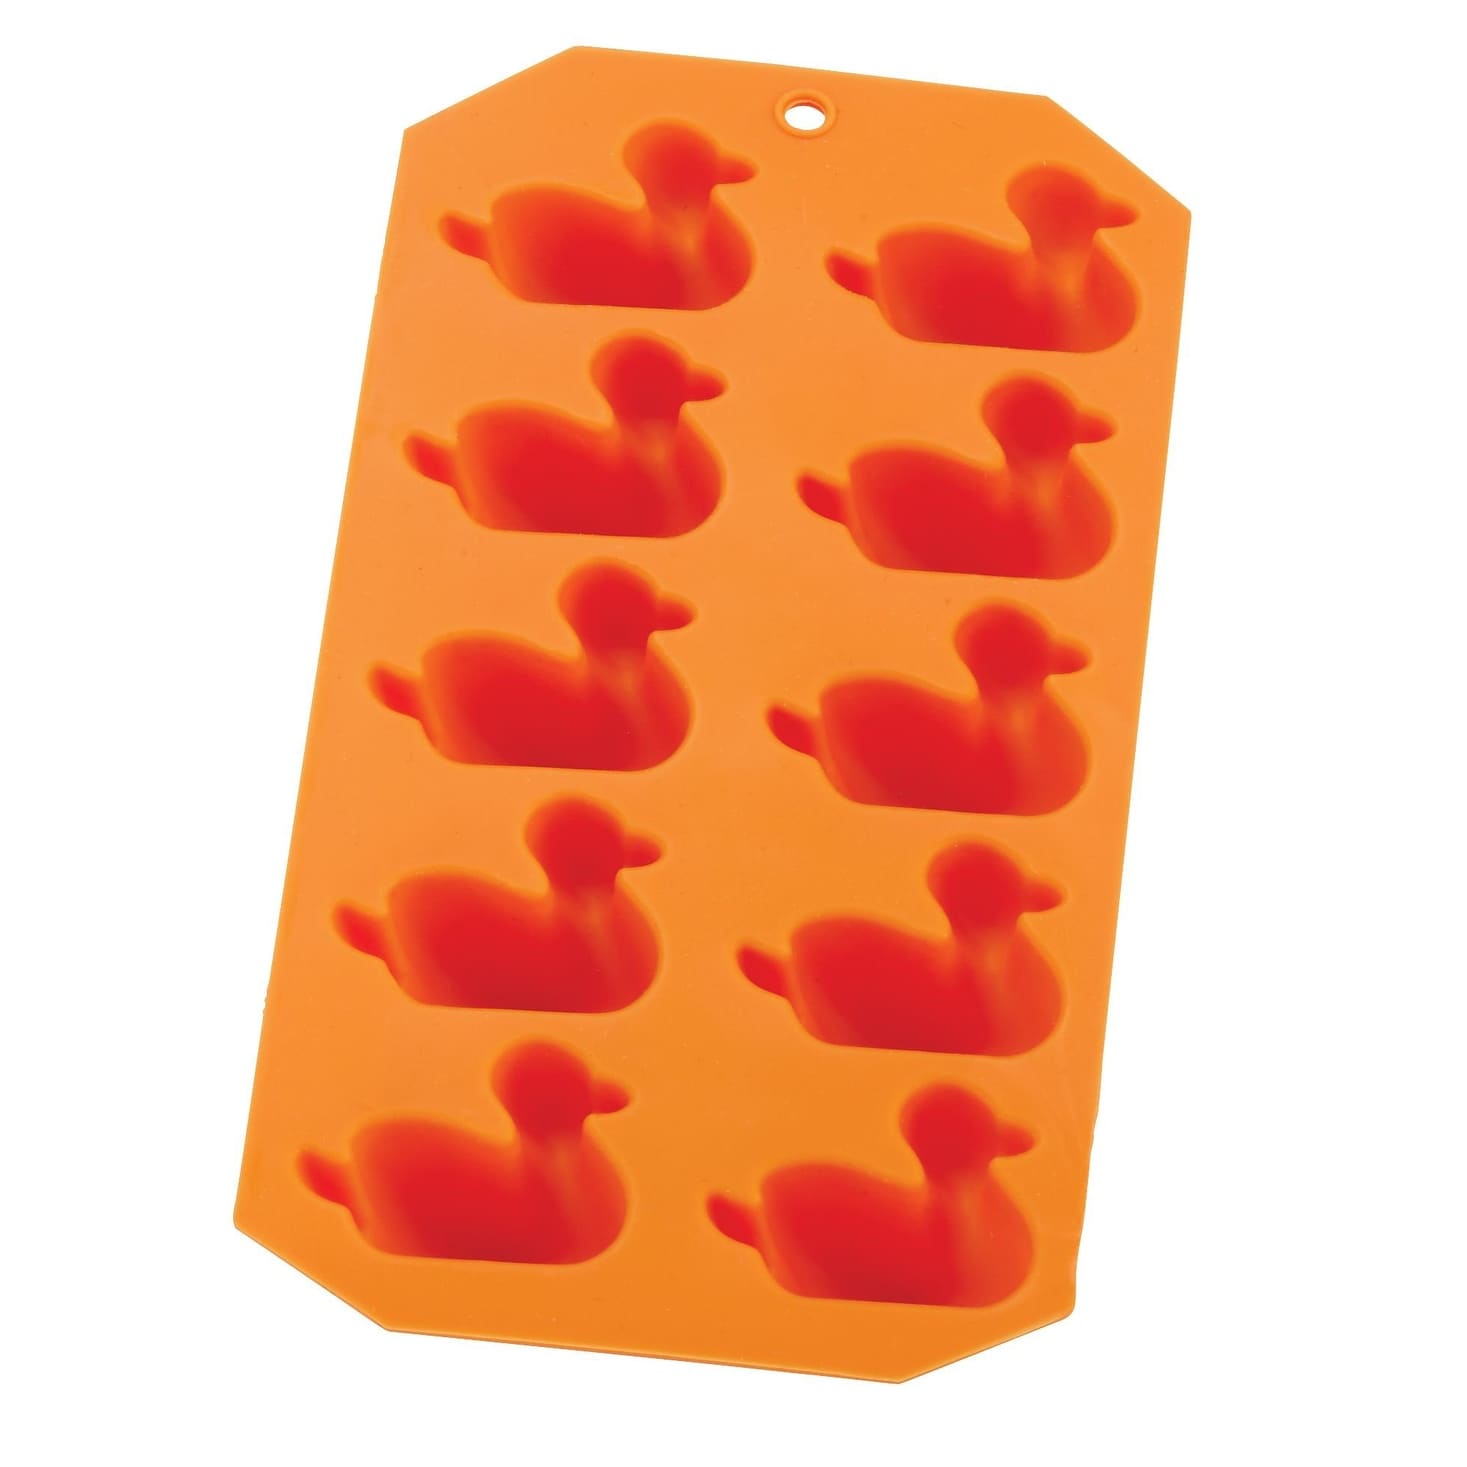 https://ak1.ostkcdn.com/images/products/is/images/direct/924cd76a1dd5fa7e0ea82f7e6fc07db93deb18ae/HIC-Orange-Silicone-Duck-Shape-Ice-Cube-Tray-and-Baking-Mold---Makes-10-Cubes.jpg